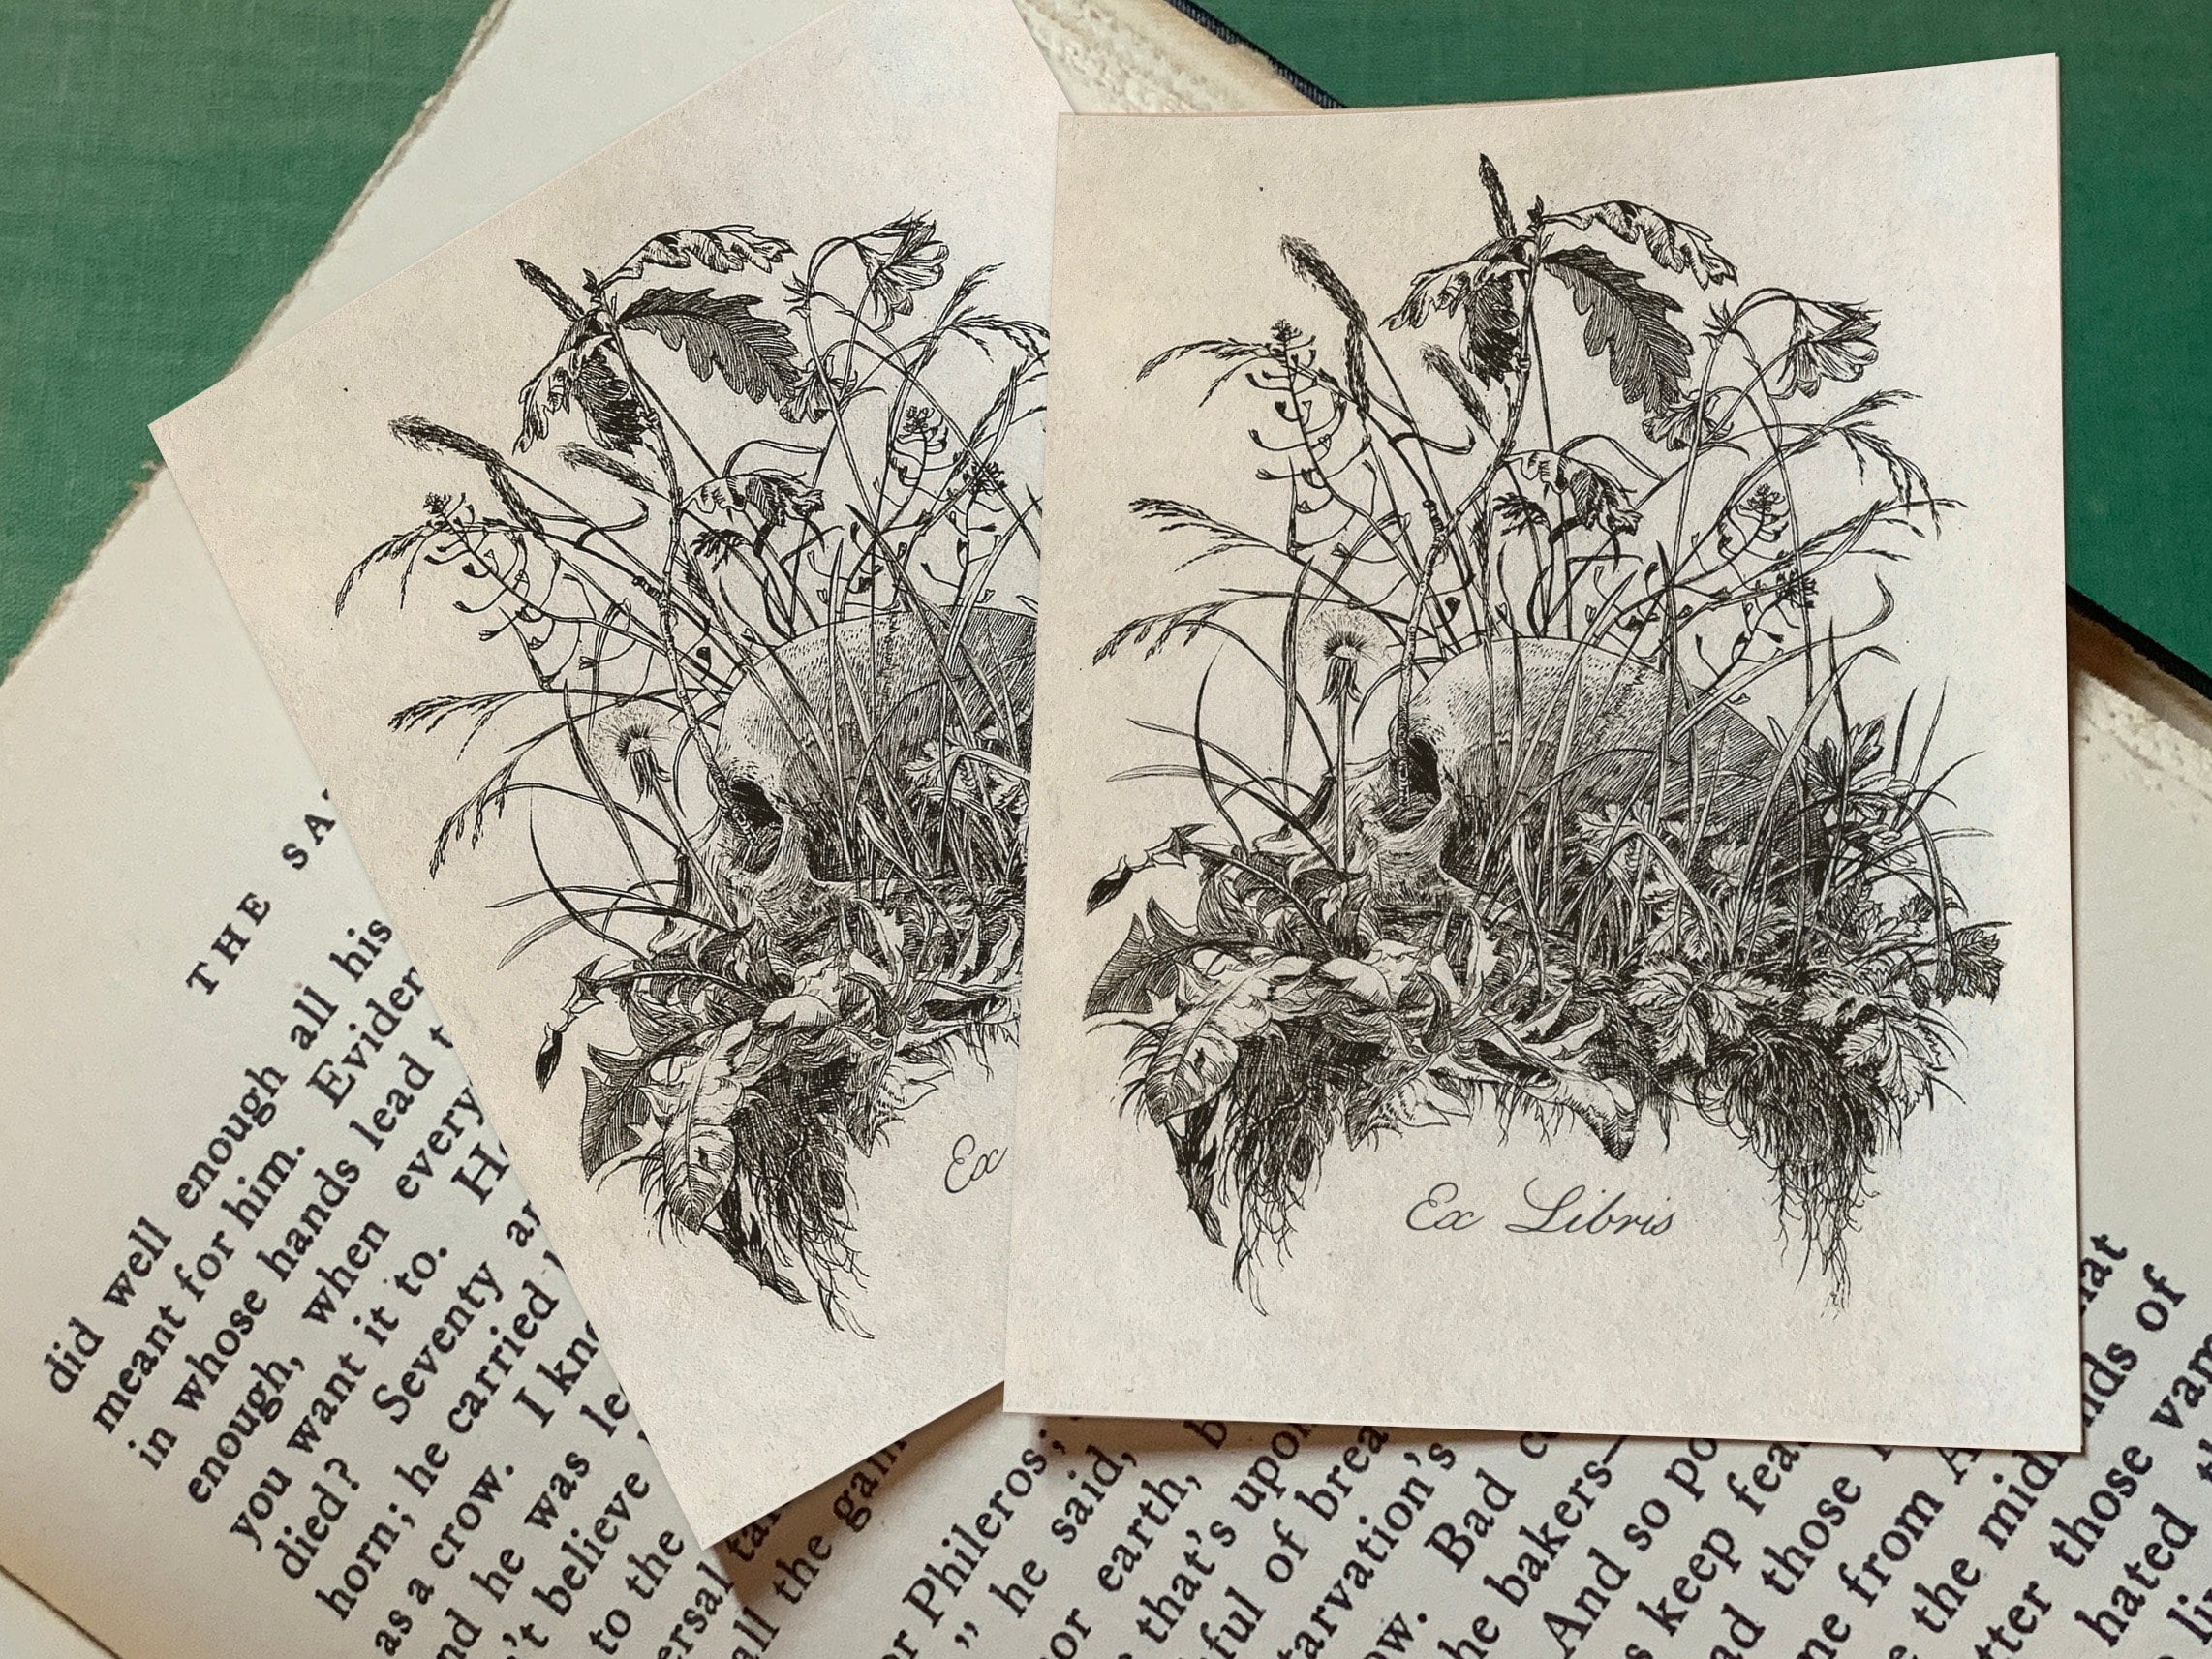 Botanical Skull, Dark Academia, Vanitas, Personalized Ex-Libris Bookplates, Crafted on Traditional Gummed Paper, 3in x 4in, Set of 30